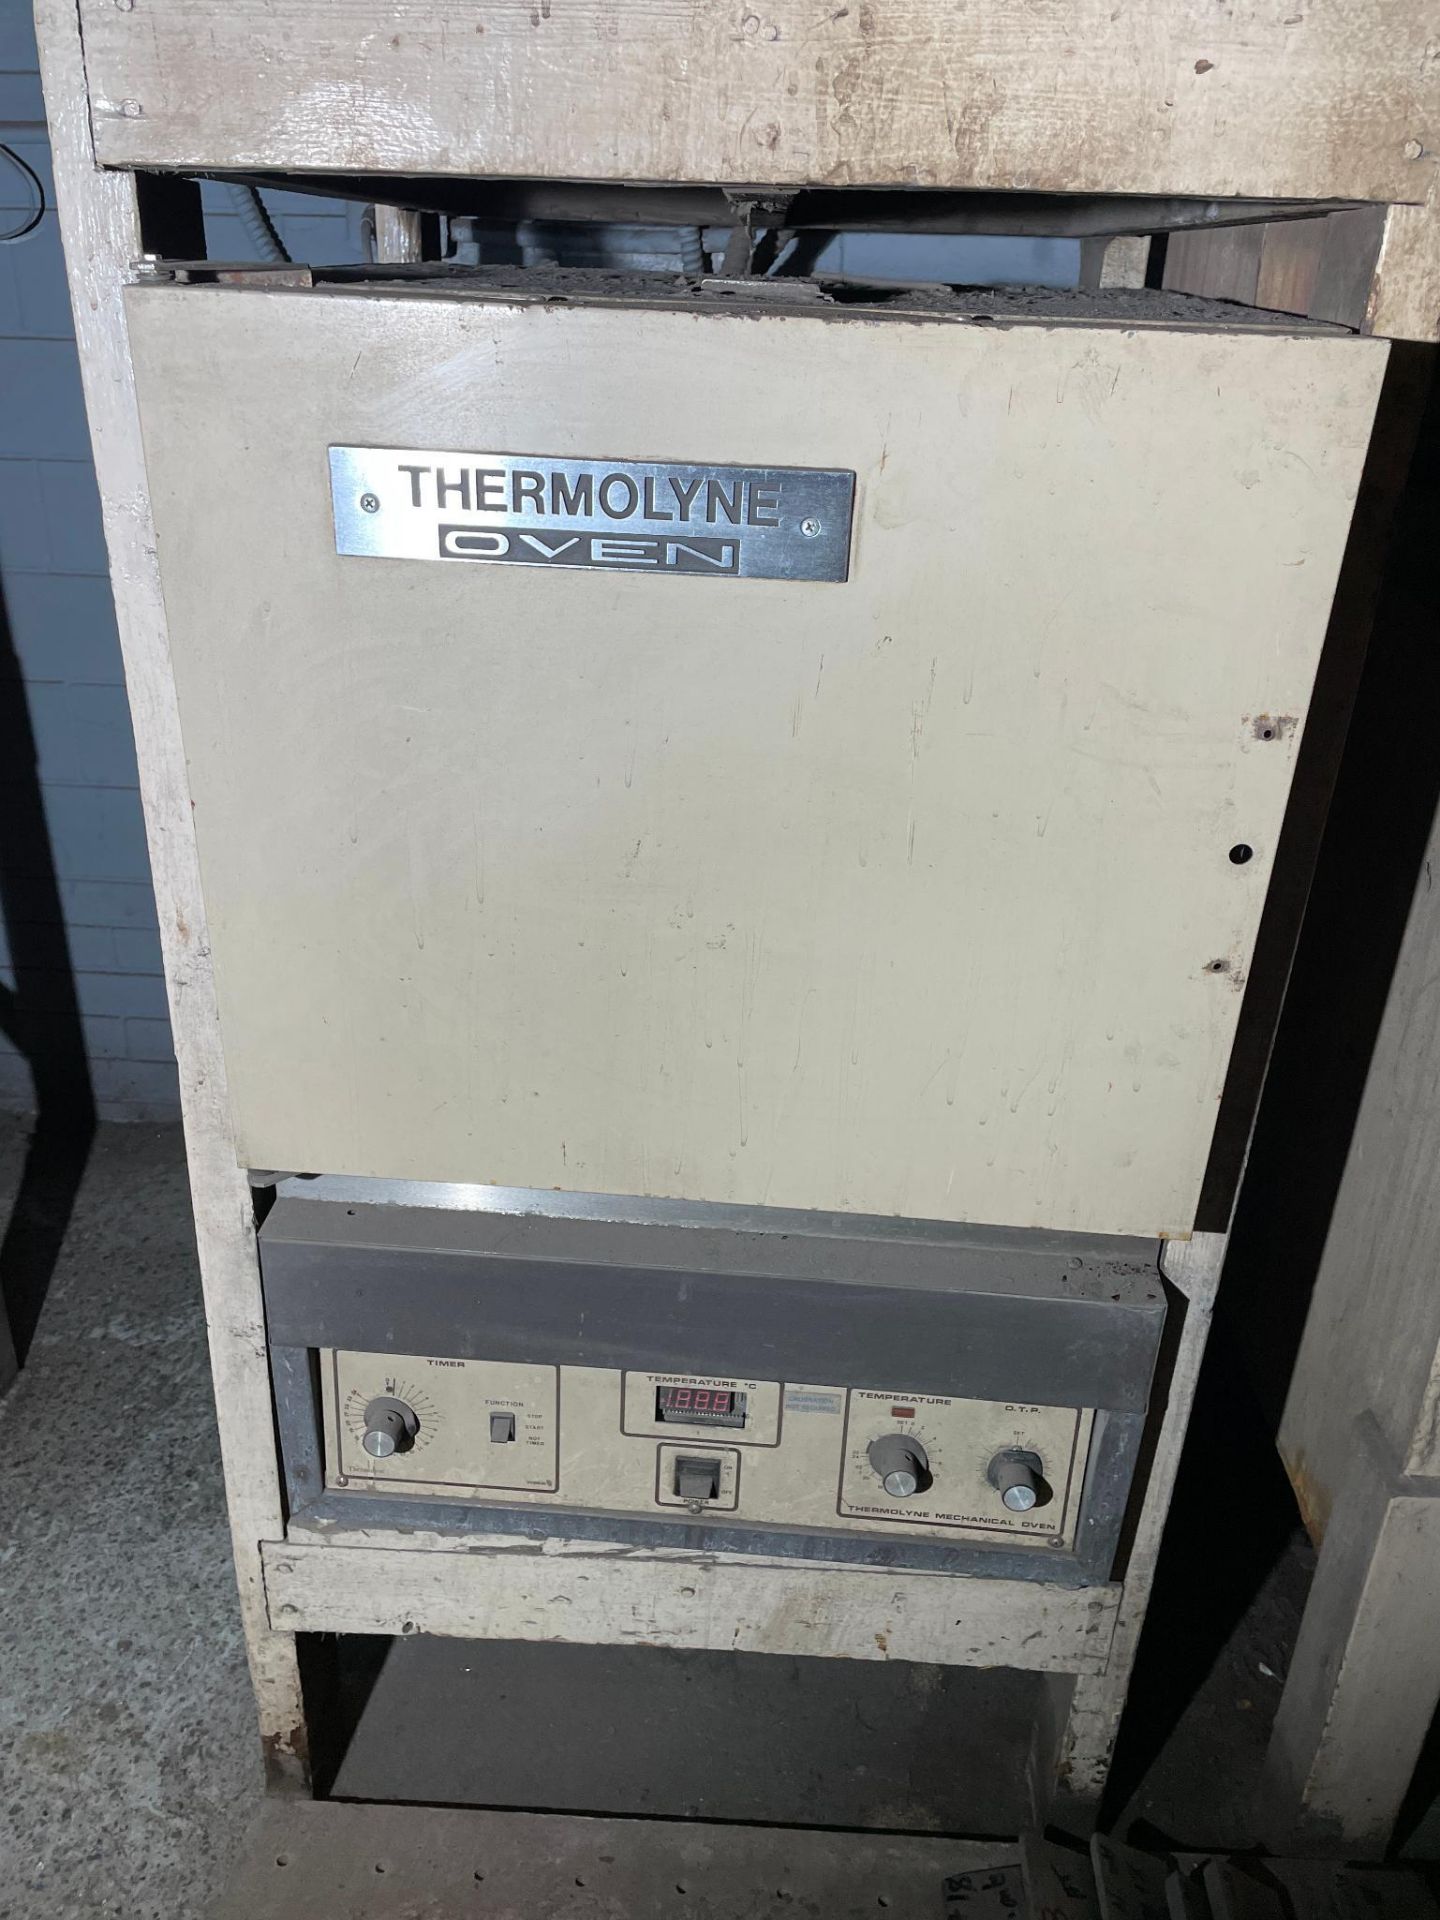 ELECTRIC FURNACE, HEAVY DUTY, 1850 deg., 230 V., w/ Thermaline oven, S/N 54321 - Image 3 of 3